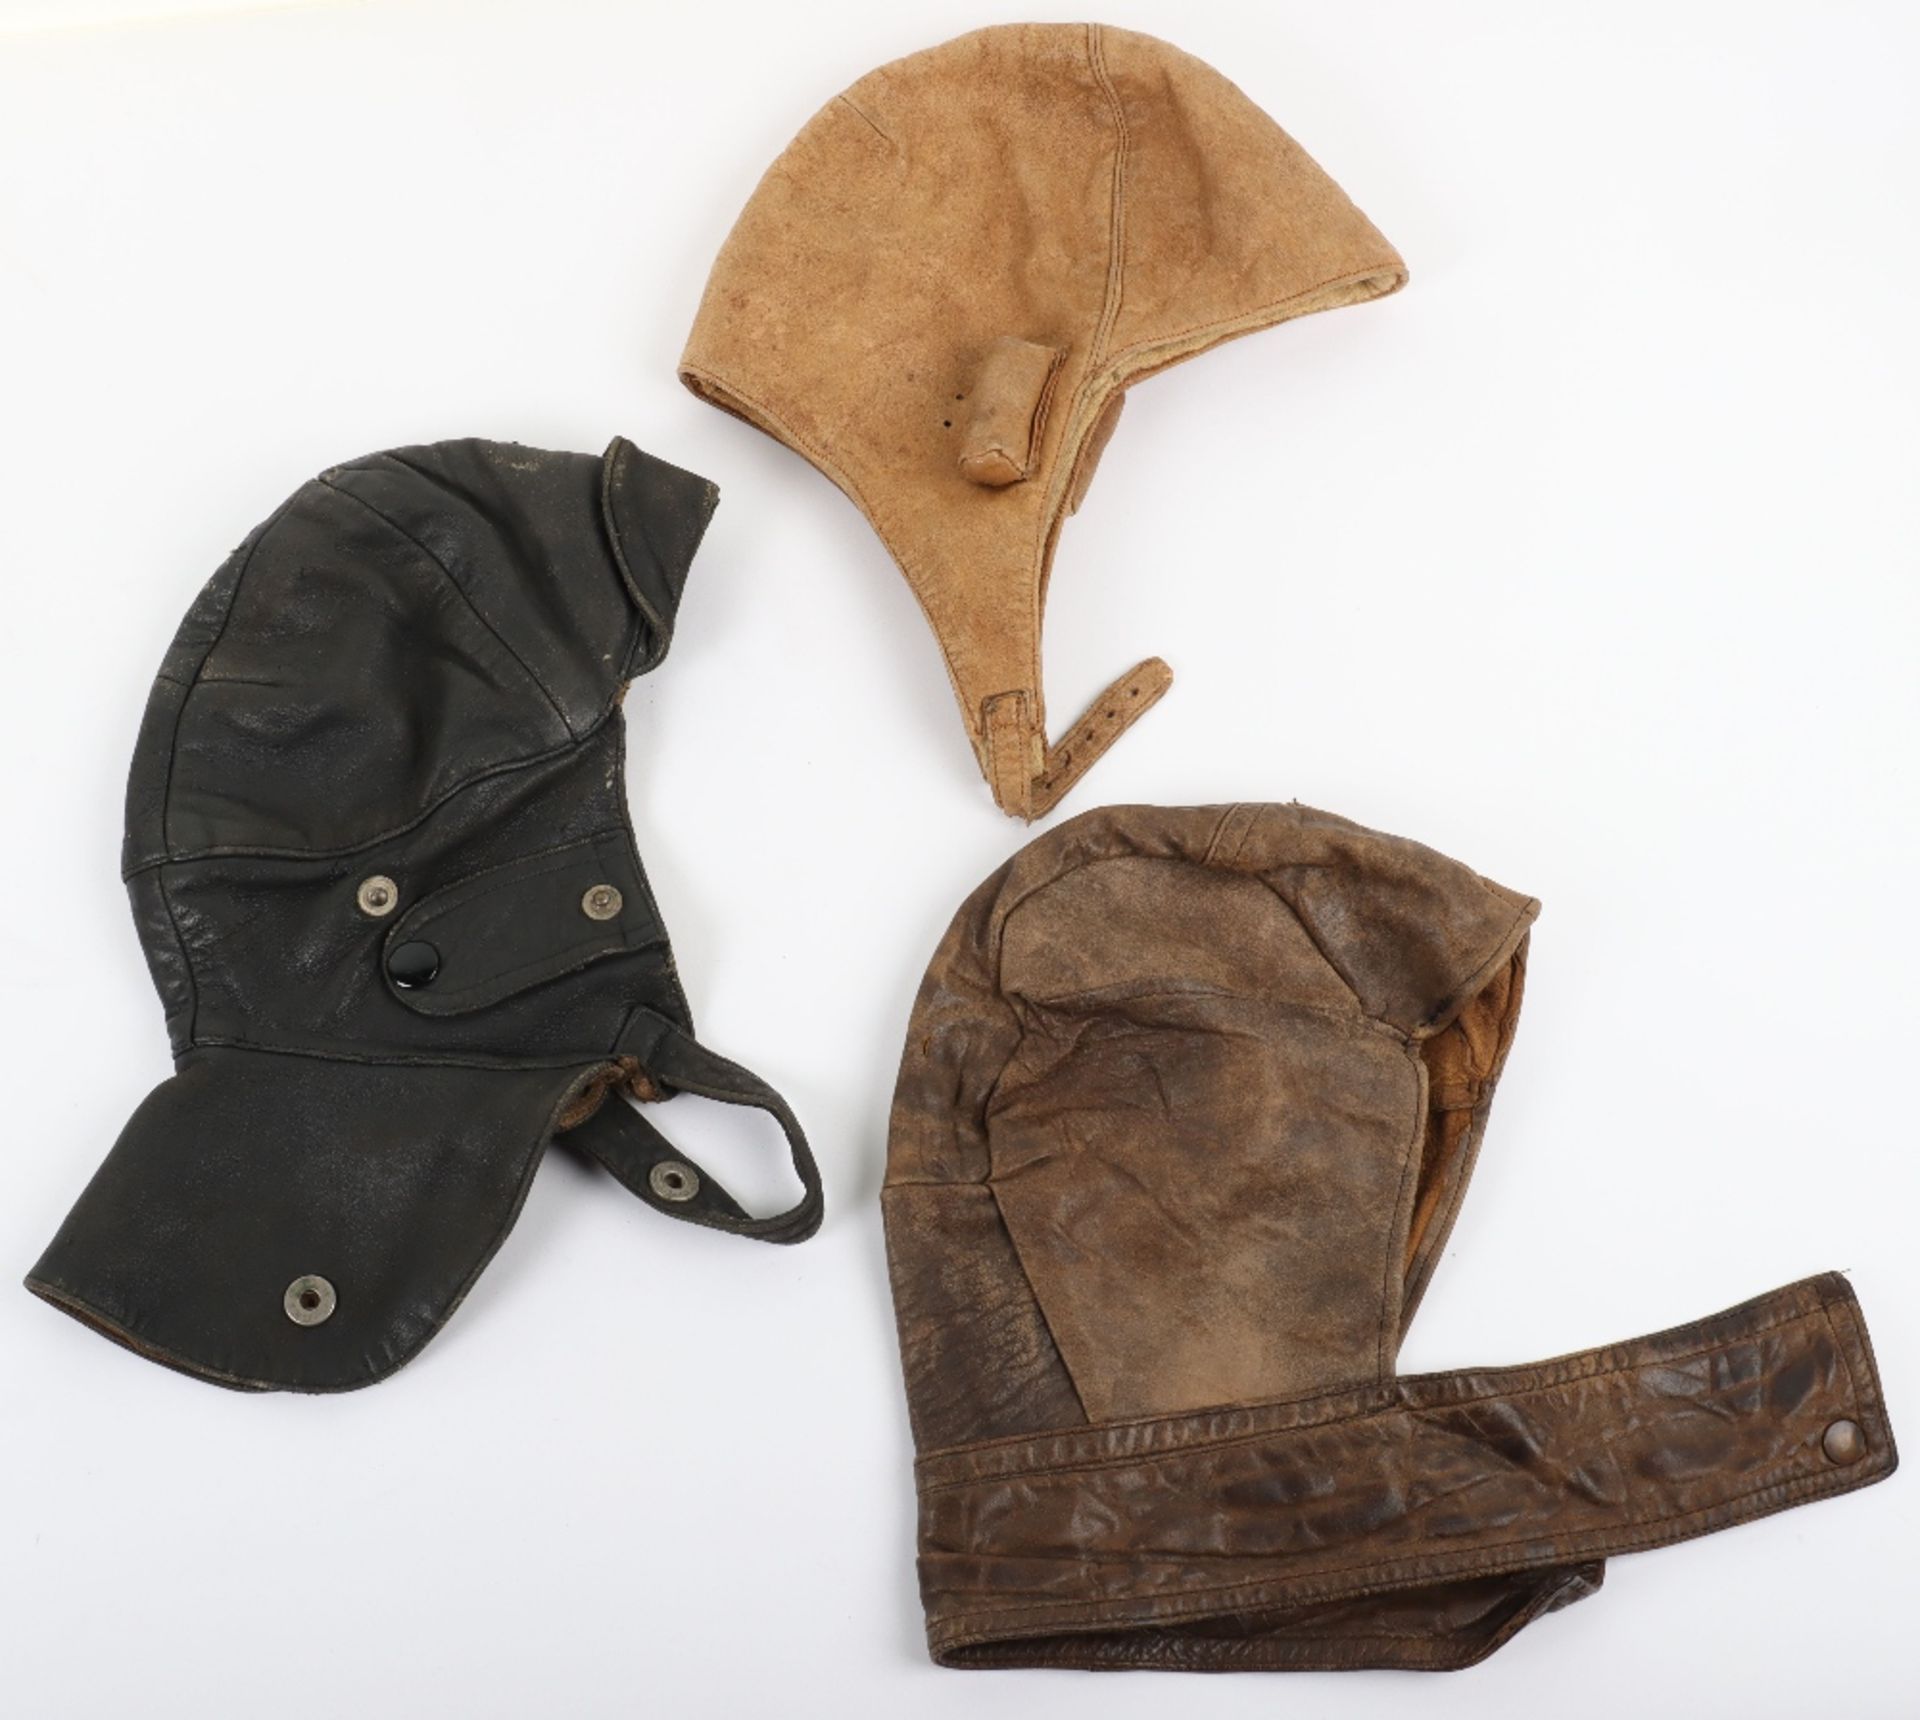 3x Early Leather Flying Helmets - Image 2 of 6